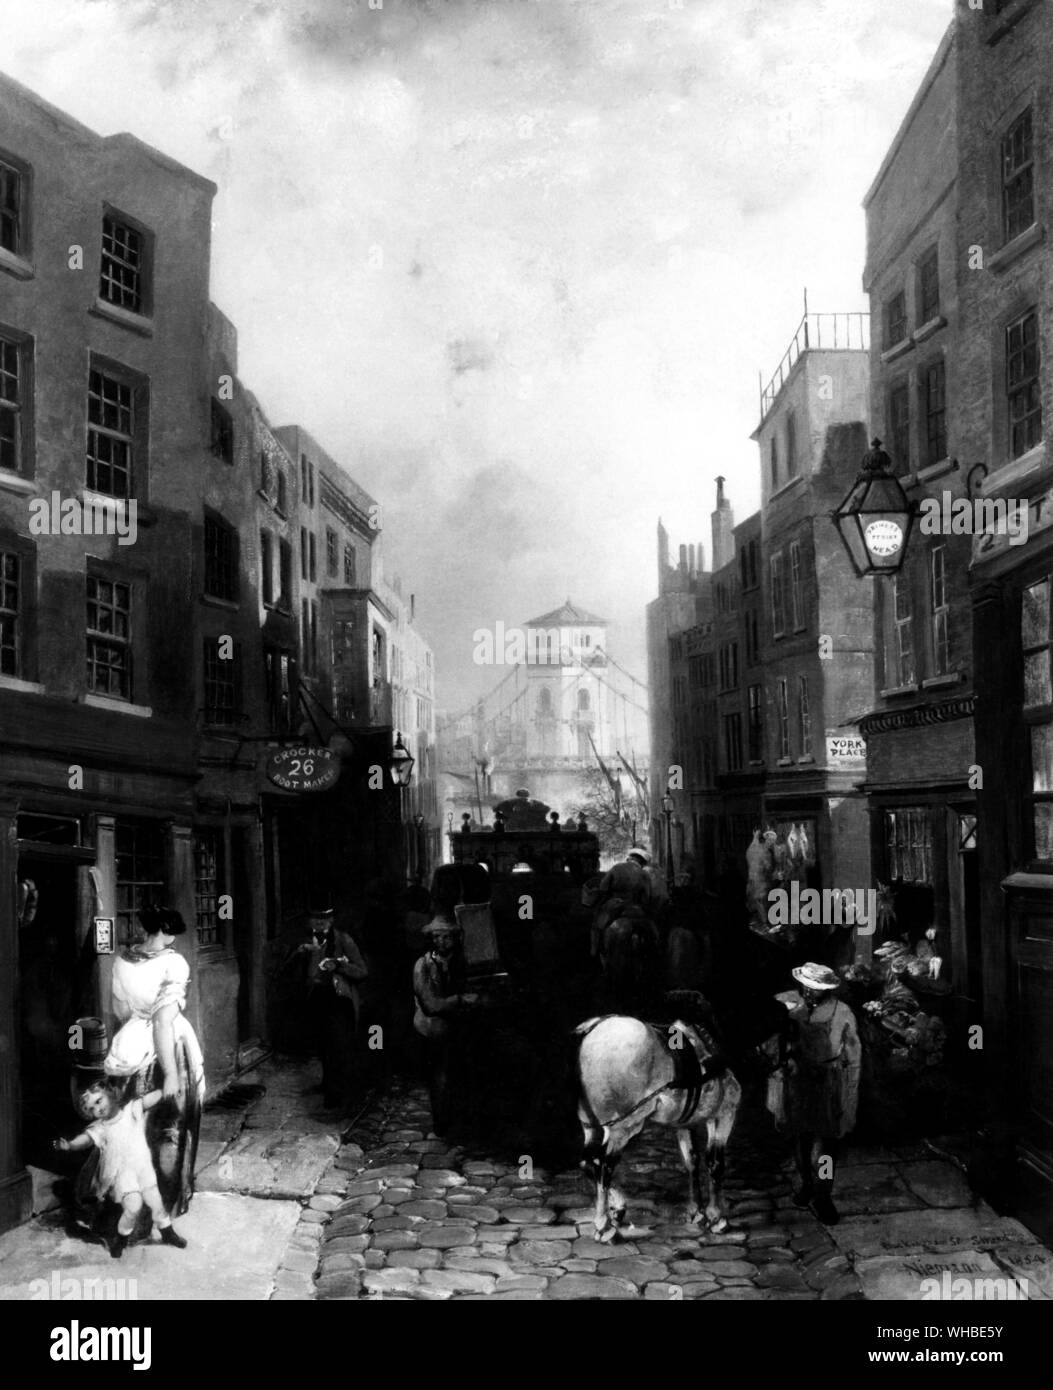 Blackingham Street Stand London by Edmund John Niemann. . 'Buckingham Street, Strand', 1854. Busy London street scene with shops. a woman pulls along a child on the left, with a carthorse standing in the cobbled street. The view is looking towards Hungerford Suspension Bridge, finished in 1845, but demolished in 1859-1860 to make way for Charing Cross Railway Bridge. The chains from the old bridge were later used for the Clifton Suspension Bridge at Bristol. . Stock Photo